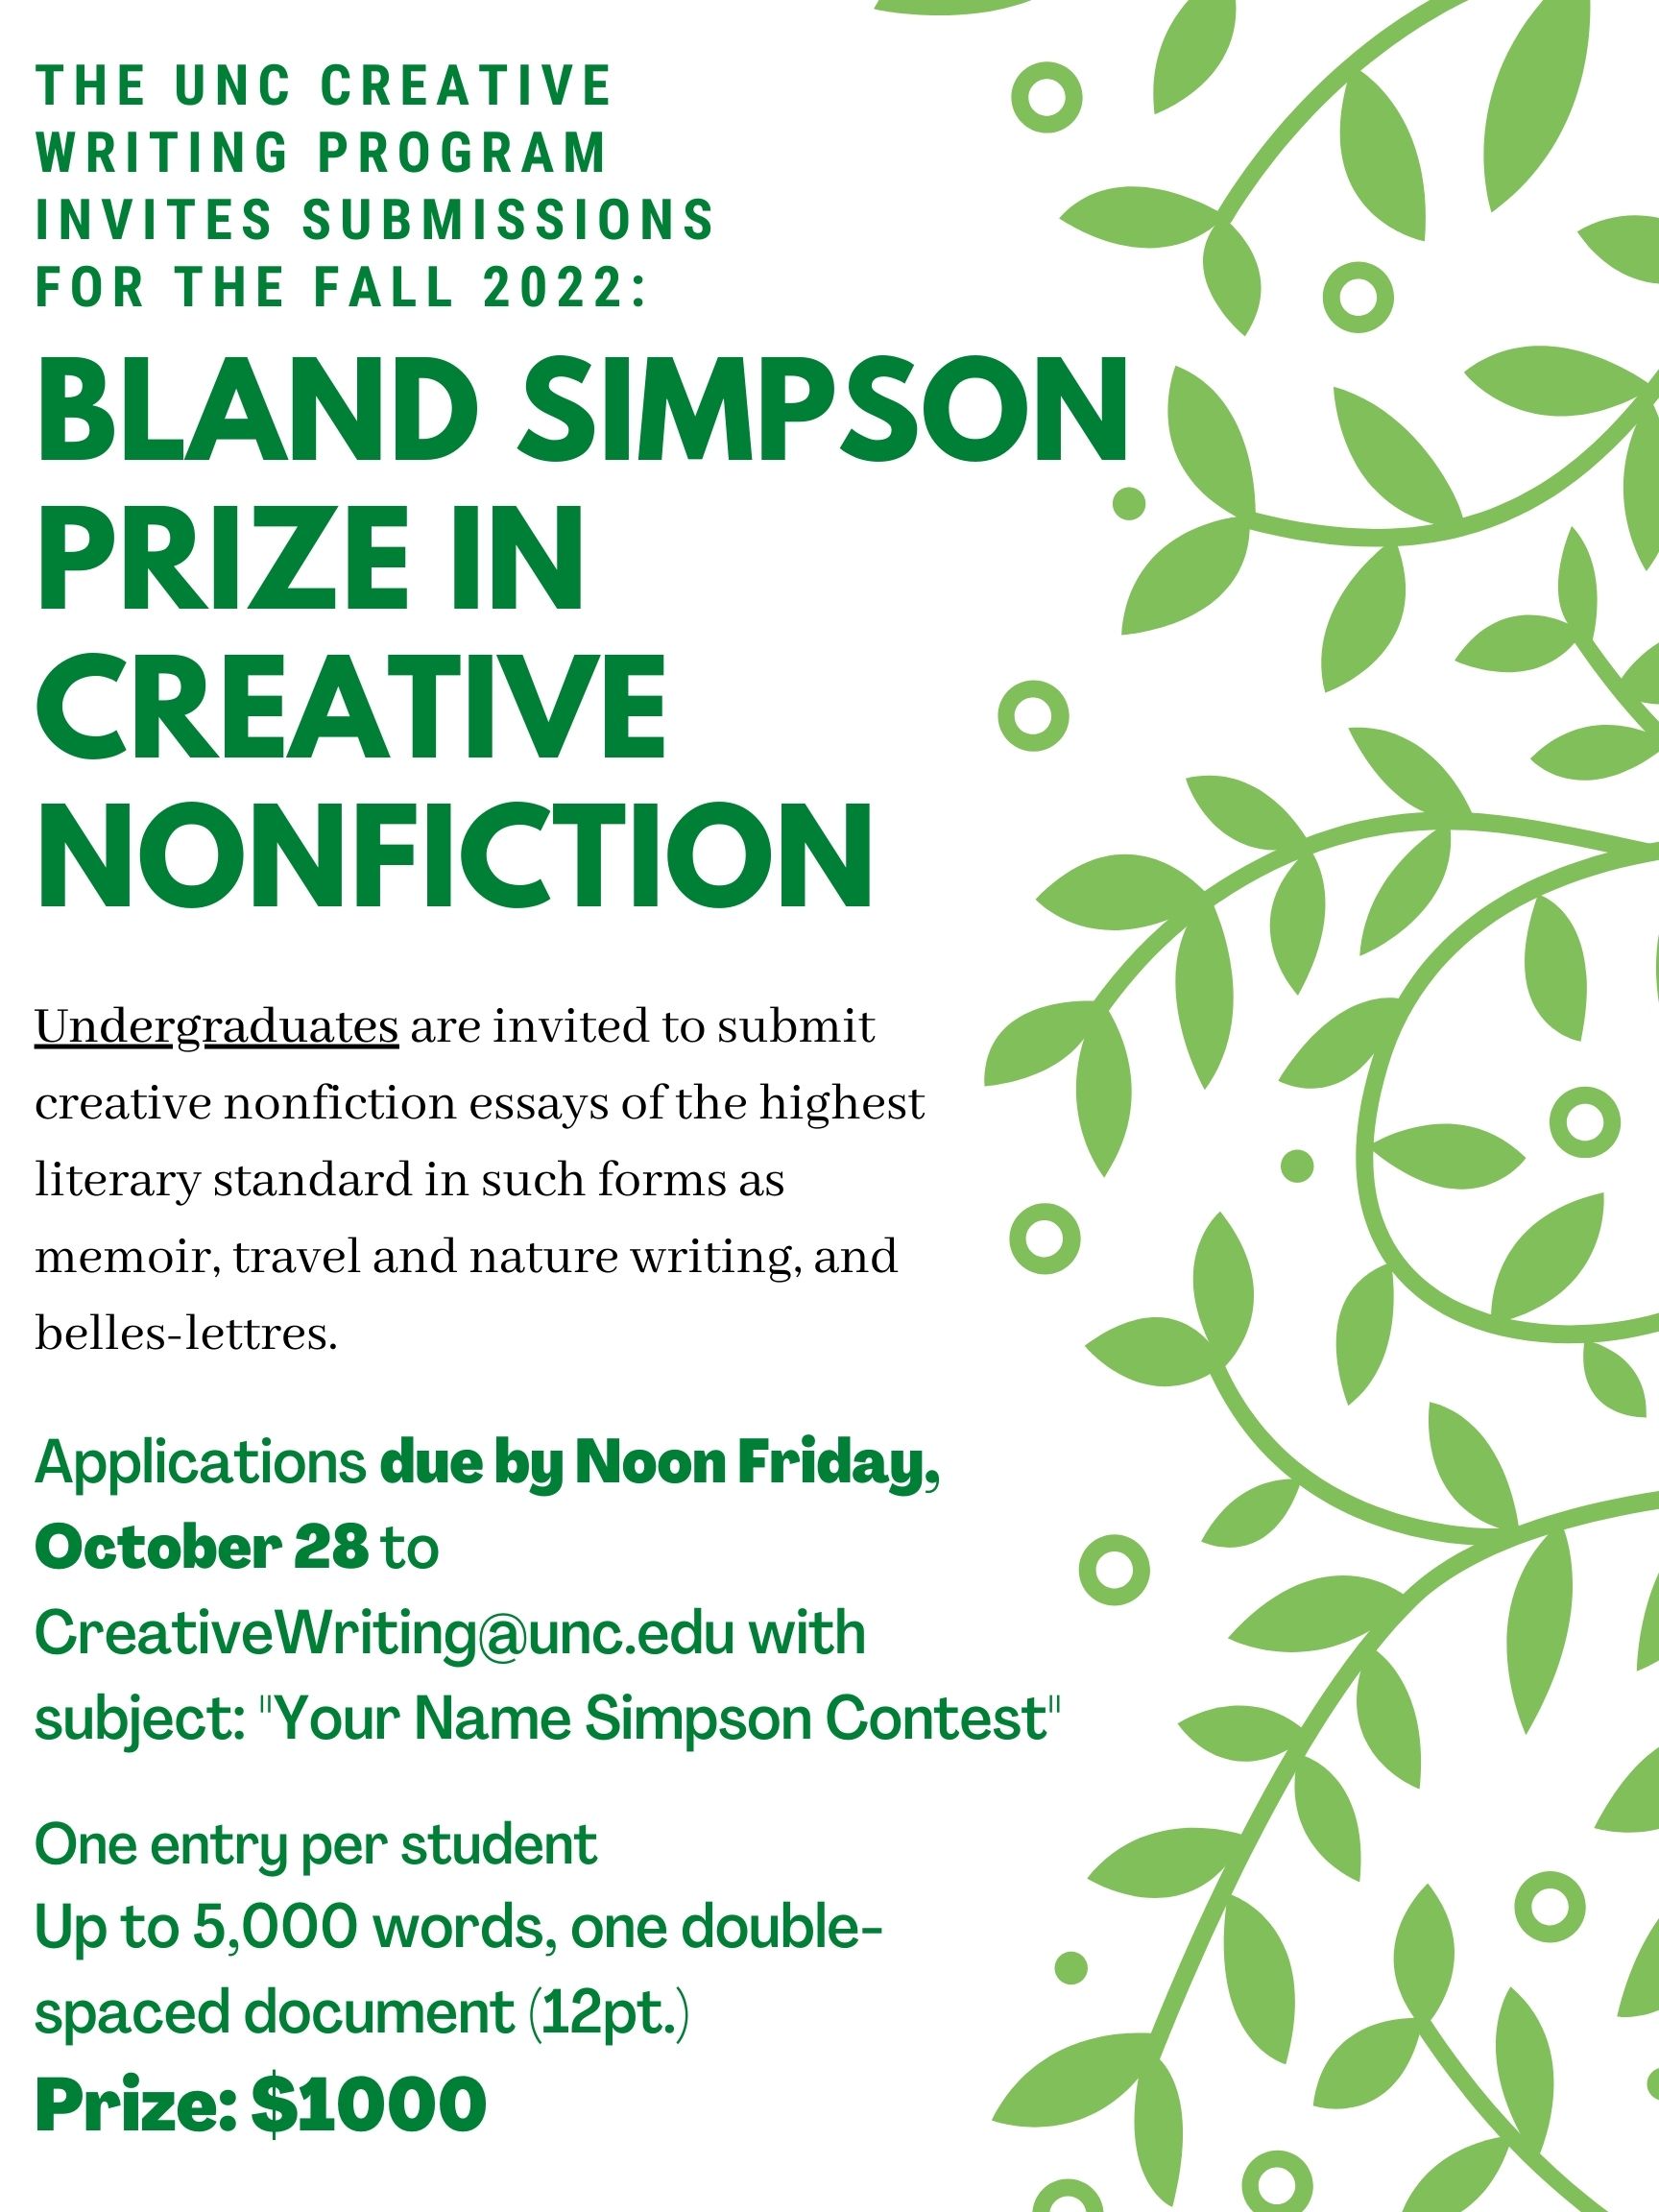 THE UNC CREATIVE WRITING PROGRAM INVITES SUBMISSIONS FOR THE FALL 2022: BLAND SIMPSON PRIZE IN CREATIVE NONFICTION Undergraduates are invited to submit creative nonfiction essays of the highest literary standard in such forms as memoir, travel and nature writing, and belles- lettres. Applications due by Noon Friday, October 28 to CreativeWriting@unc.edu with subject: "Your Name Simpson Contest" One entry per student Up to 5,000 words, one doublespaced document (12pt.) Prize: $1000